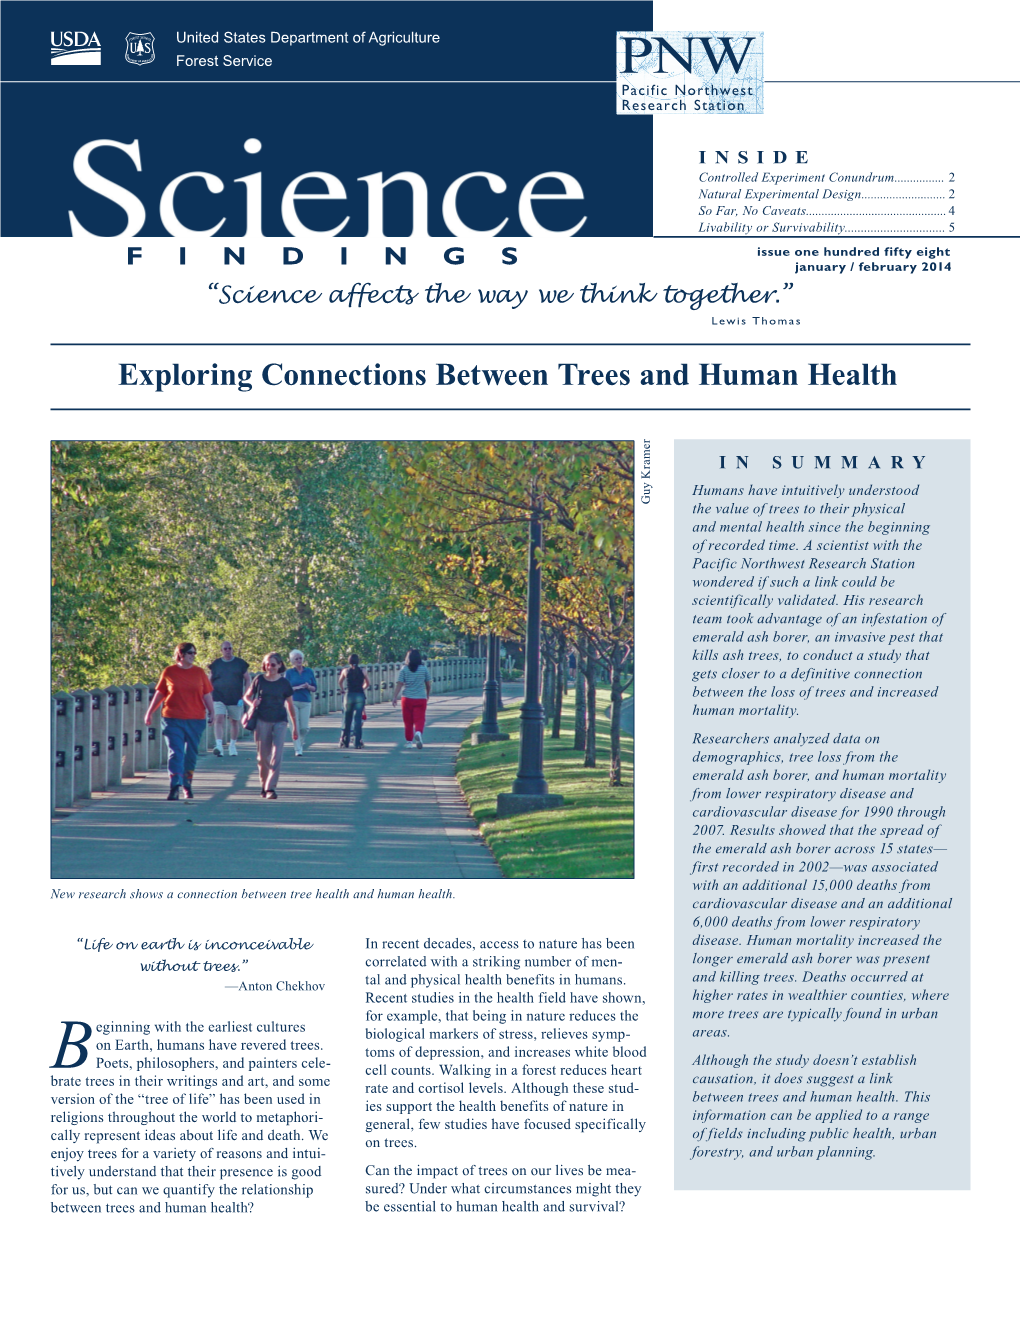 Exploring Connections Between Trees and Human Health